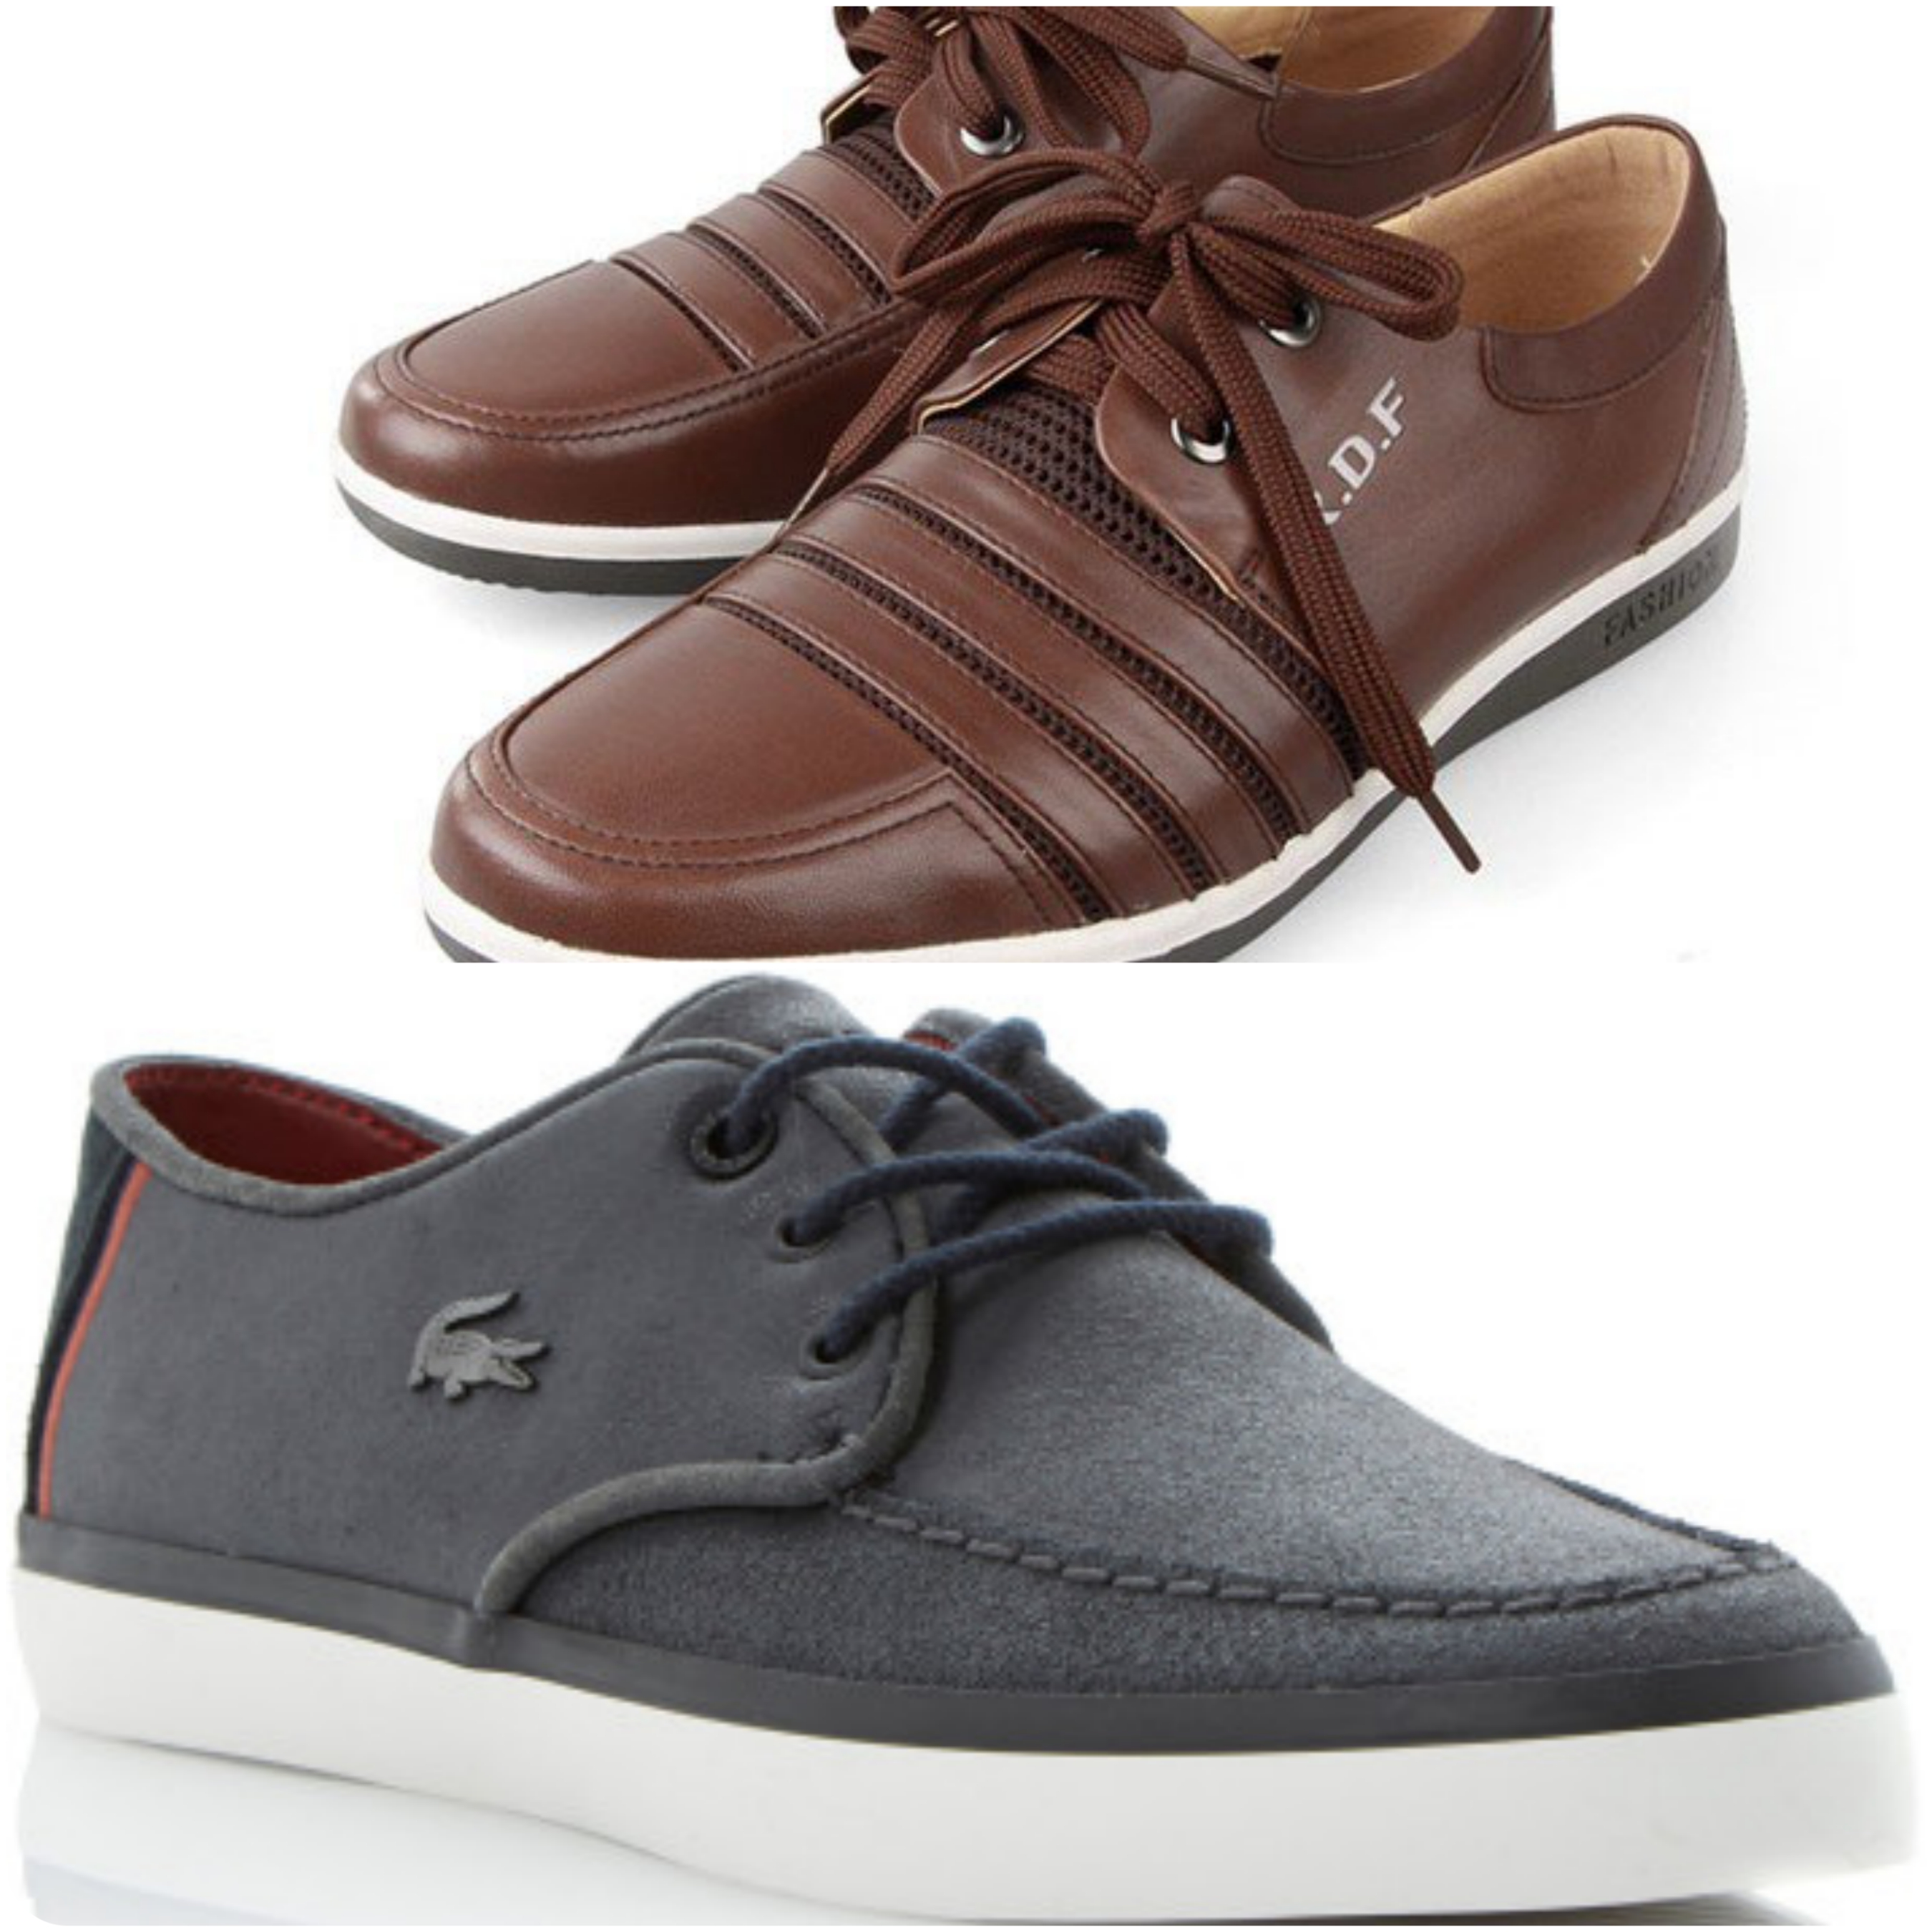 Latest Casual Shoes Designs for Men 2015-2016